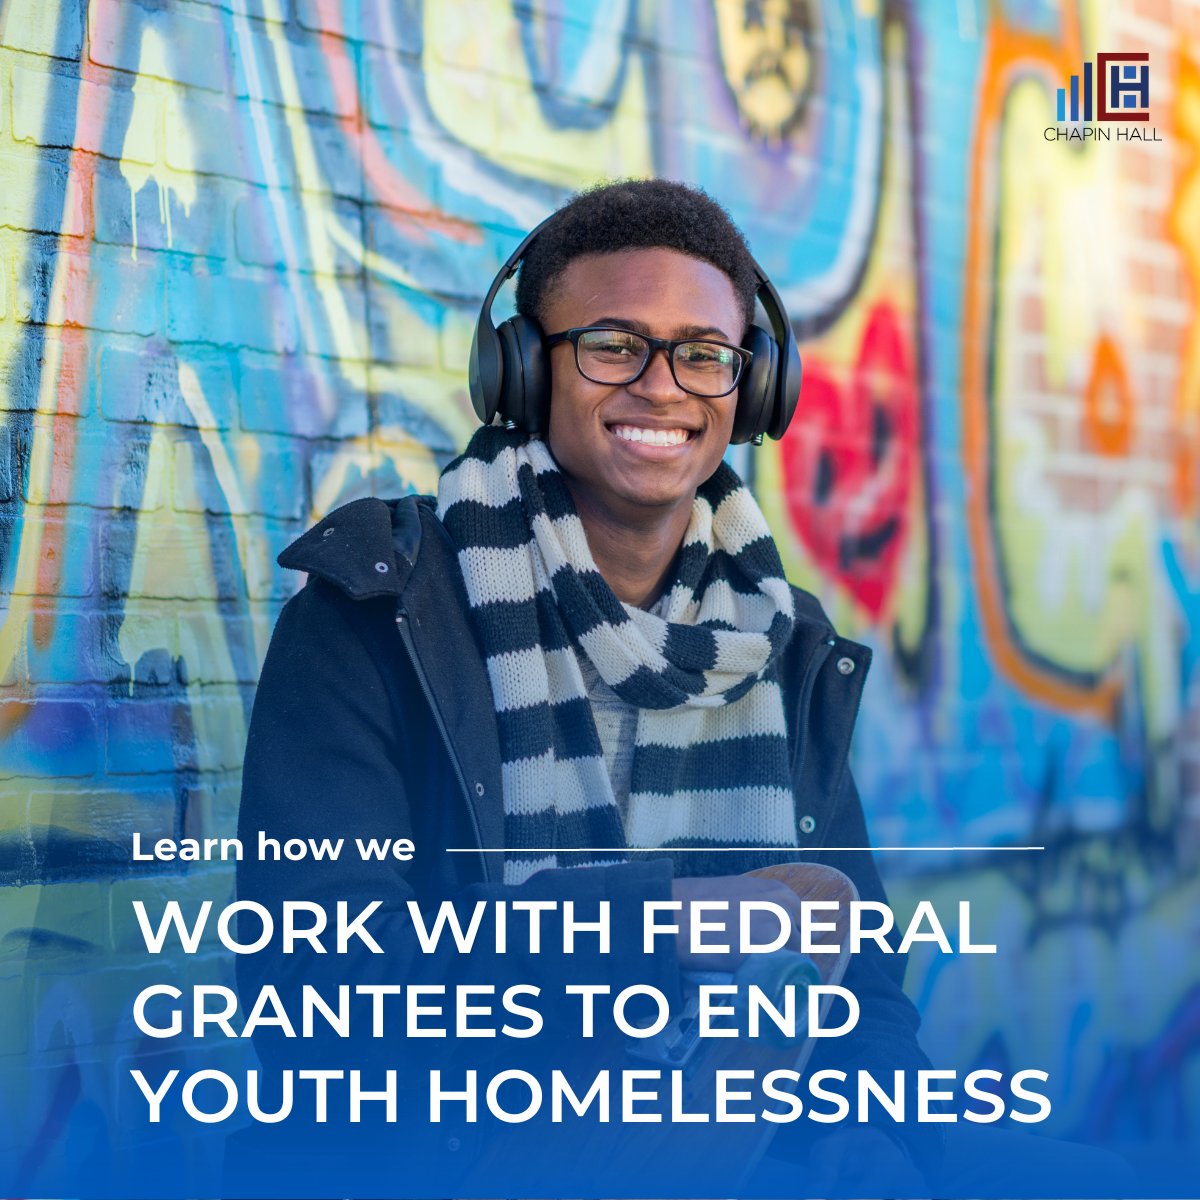 Chapin Hall conducts an annual national needs assessment for FSYB-funded Runaway & Homeless Youth program grantees. Explore how we support grantees so they can best serve young people seeking #Housing stability: chapinhall.org/project/workin…​ #EndYouthHomelessness @ACFHHS